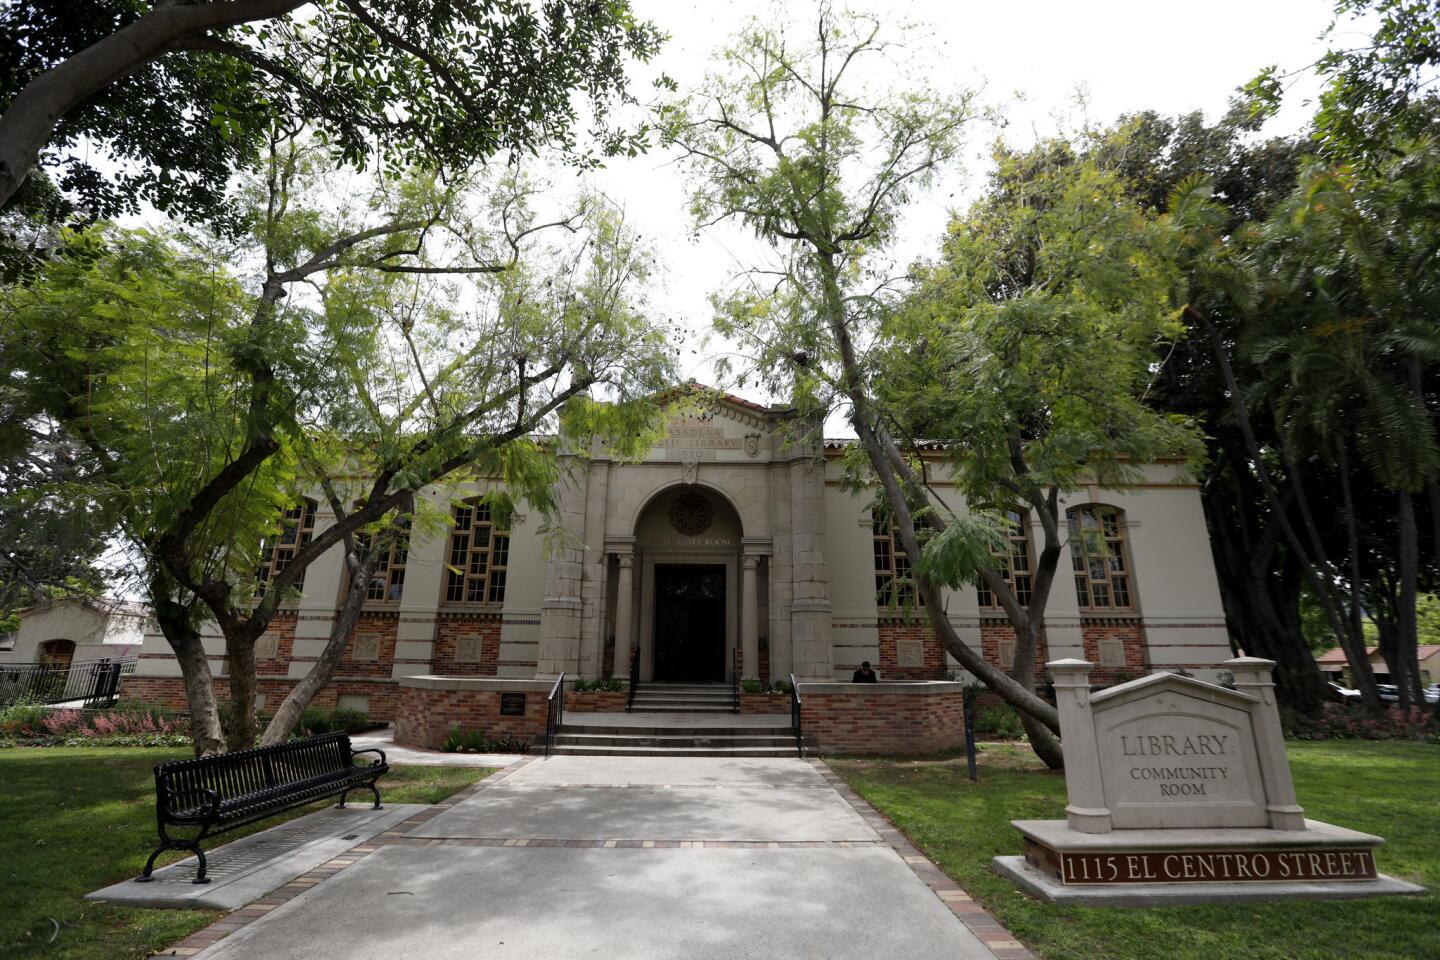 SOUTH PASADENA, CA APRIL 11, 2019: The entrance to the library community room at the South Pasadena Public Library in South Pasadena CA April 11, 2019. According to Steve Fjeldsted, South Pasadena City Librarian the South Pasadena Public Library [is] an expanded and remodeled version of the original 1908 Carnegie Library. (Francine Orr/ Los Angeles Times)